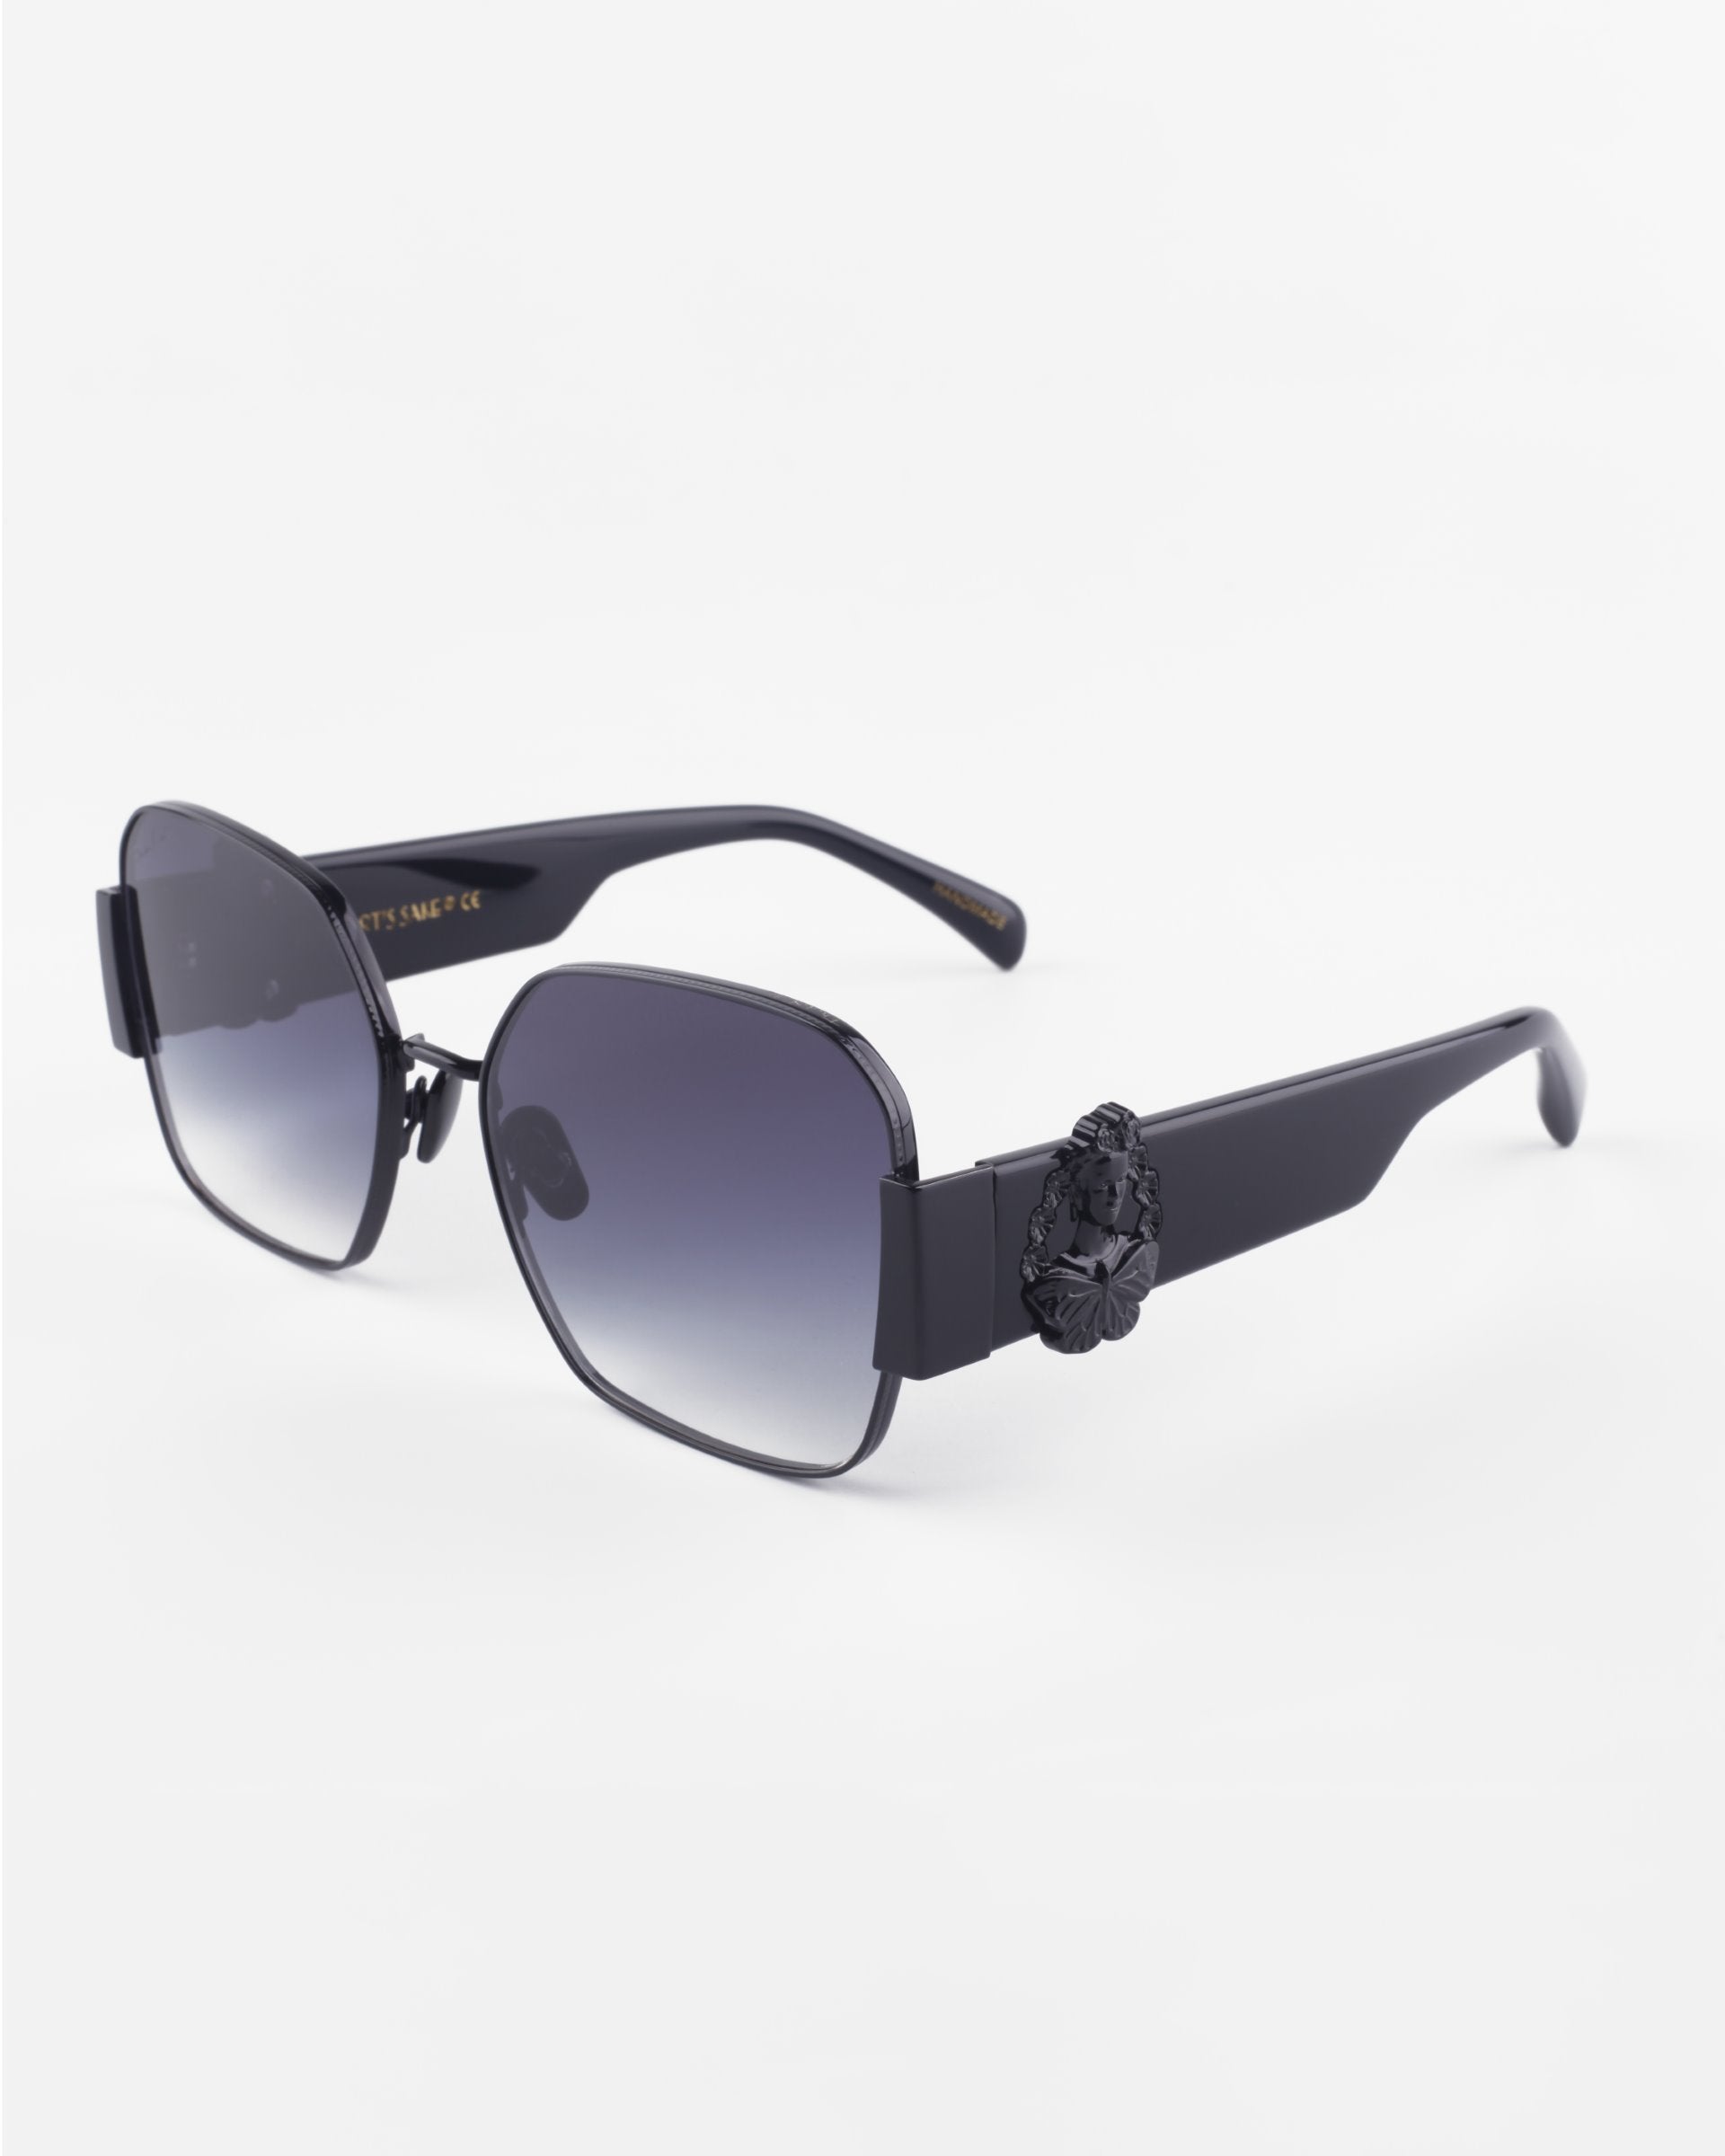 A pair of stylish, oversized black sunglasses with square lenses that have a gradient tint from dark to light. Featuring ultra-lightweight nylon lenses and 100% UVA & UVB protection, the Frida Mask by For Art's Sake® also boasts a decorative black piece on the gold-plated stainless steel hinges against a white background.